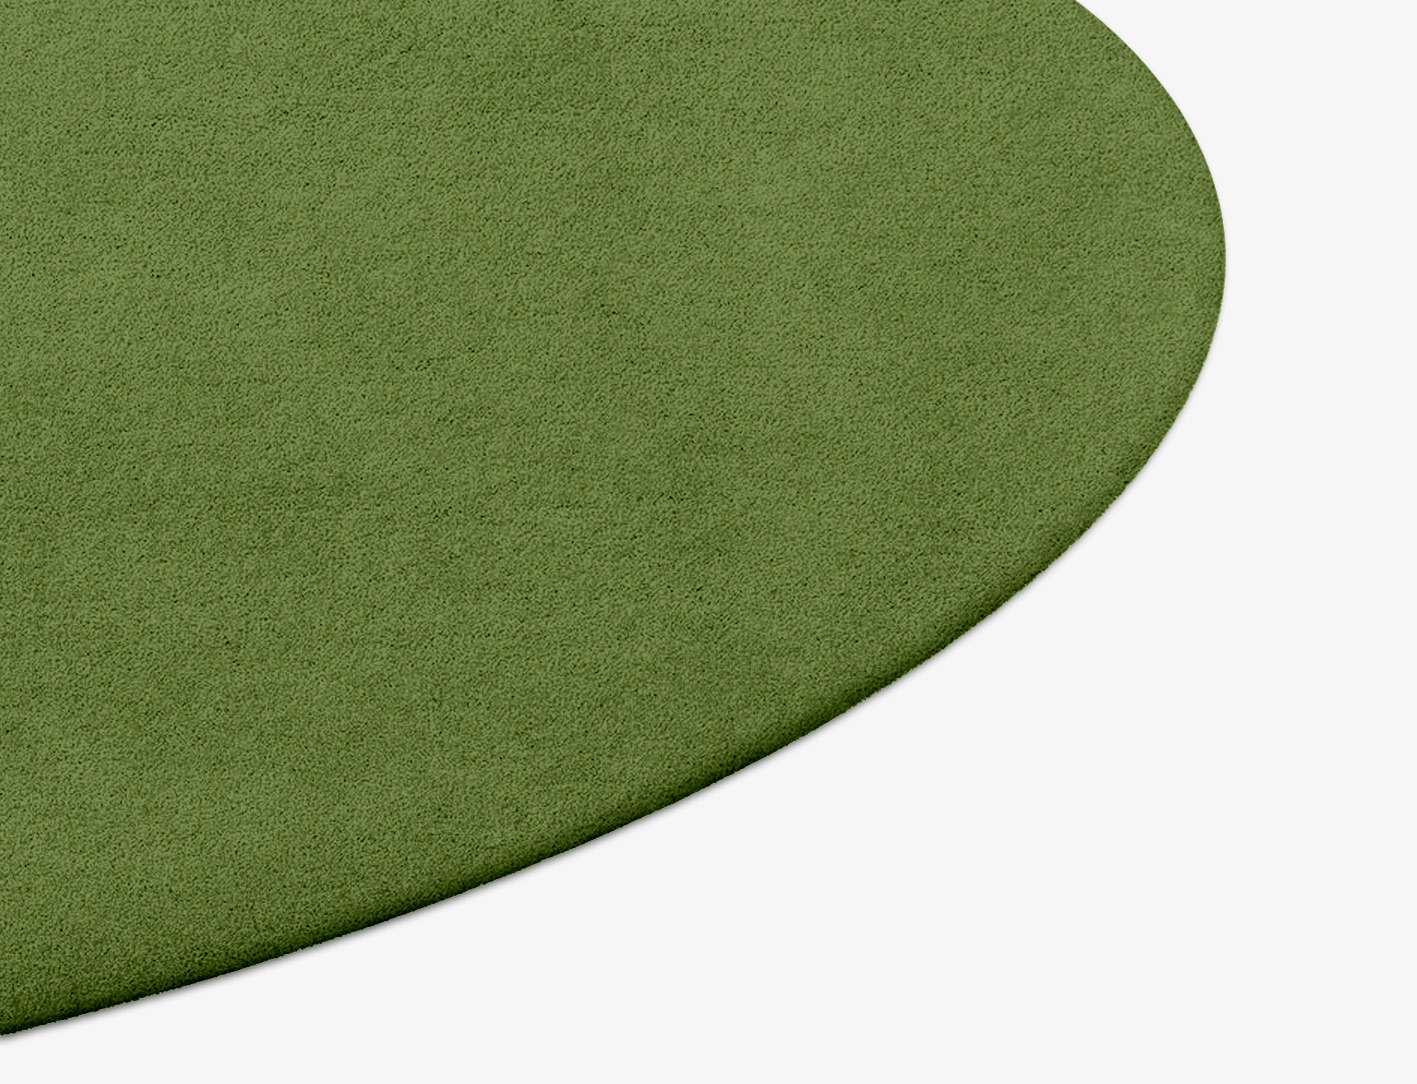 RA-CL06 Solid Colours Round Hand Tufted Pure Wool Custom Rug by Rug Artisan